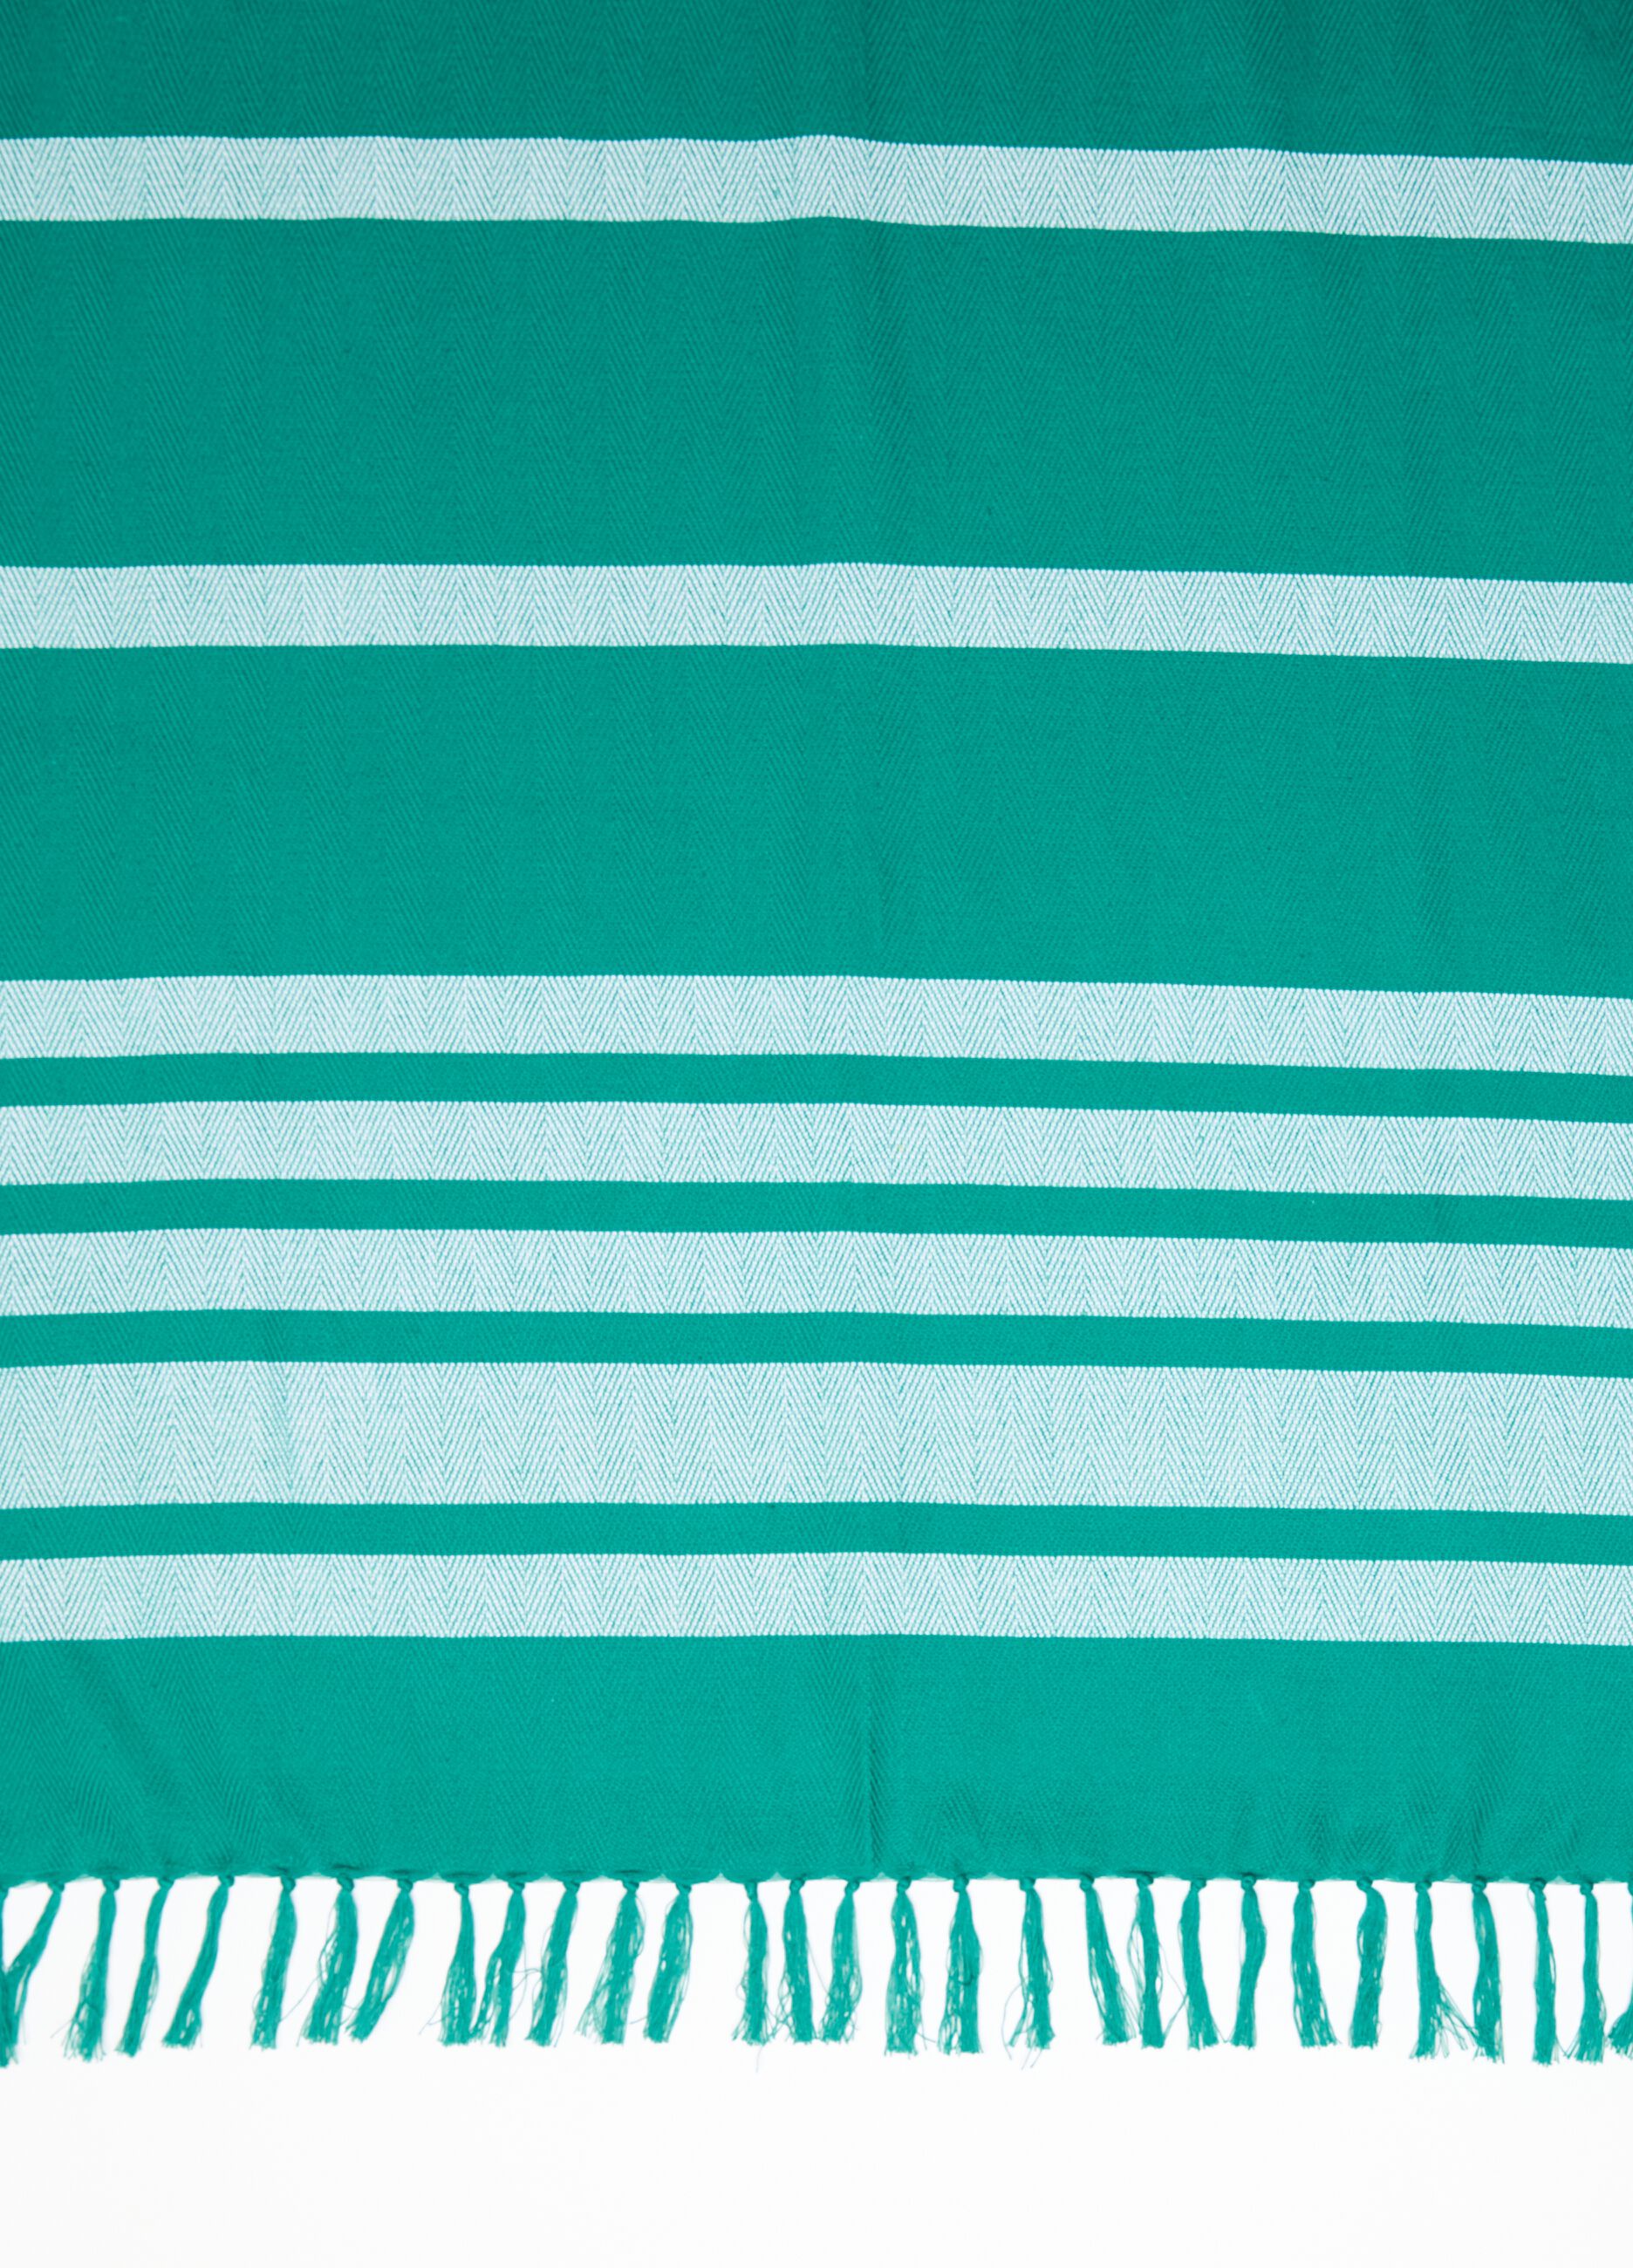 Beach towel with striped design